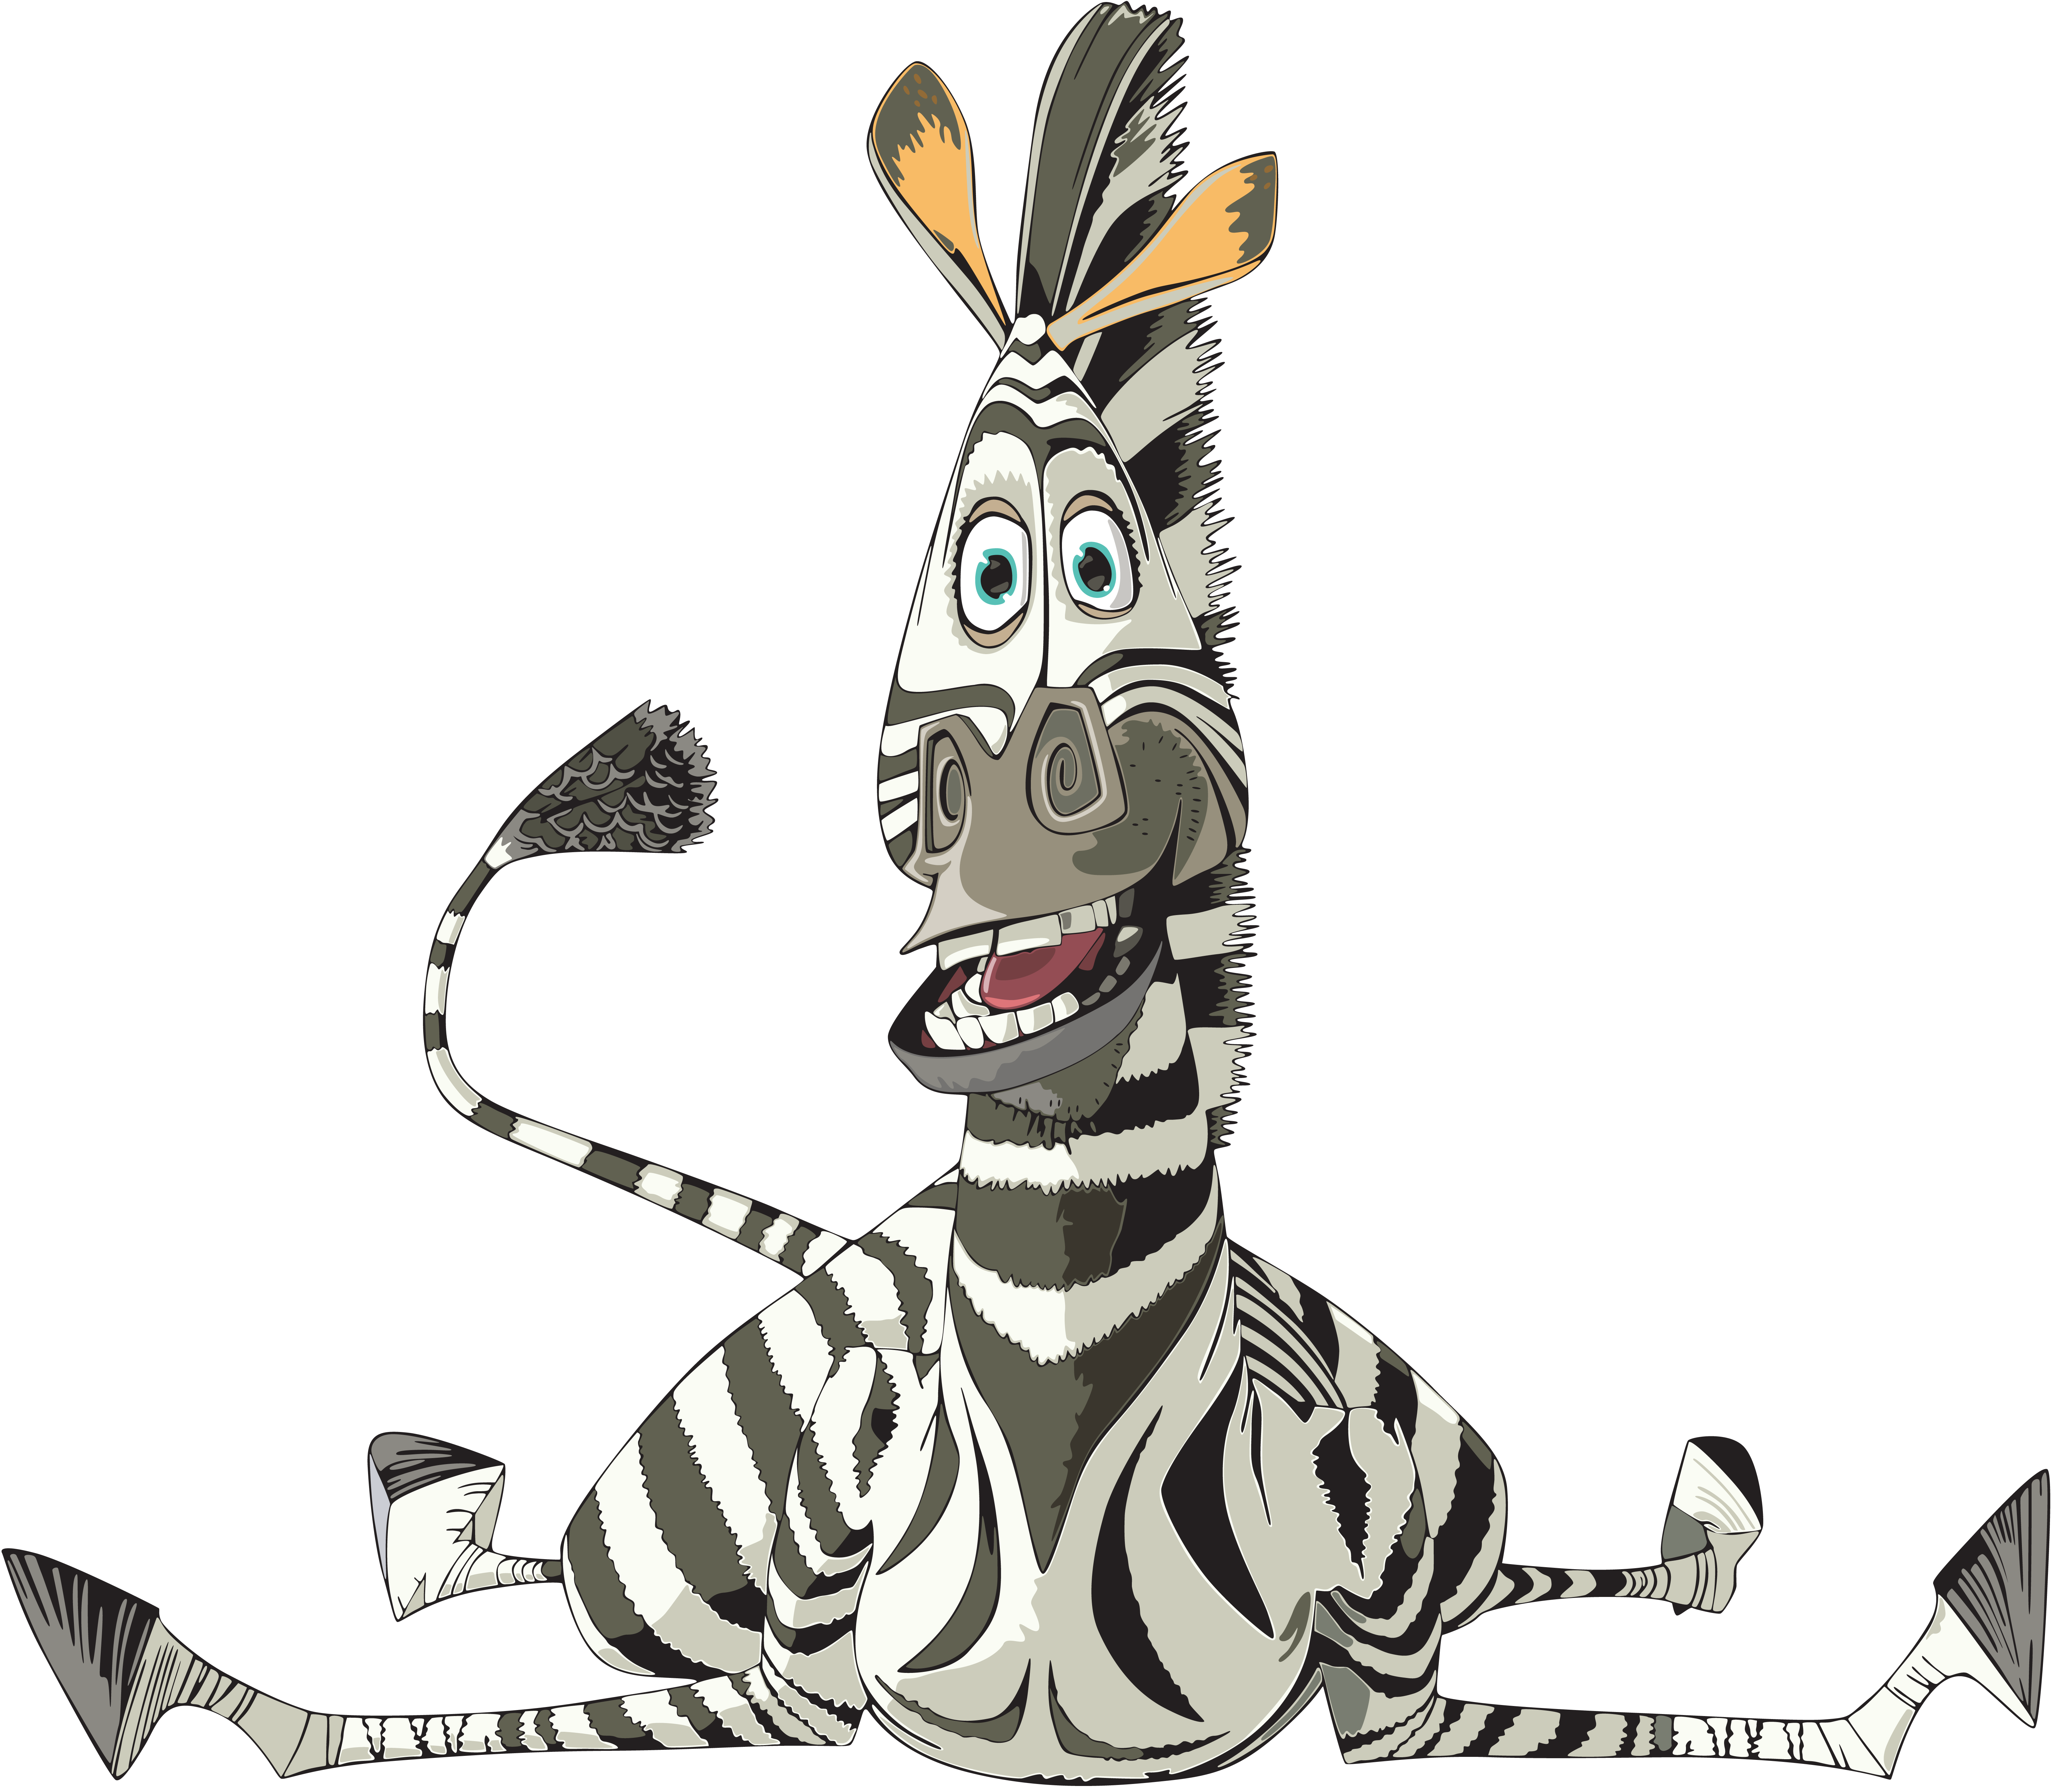 Clipart zebra marty, Clipart zebra marty Transparent FREE for download ...